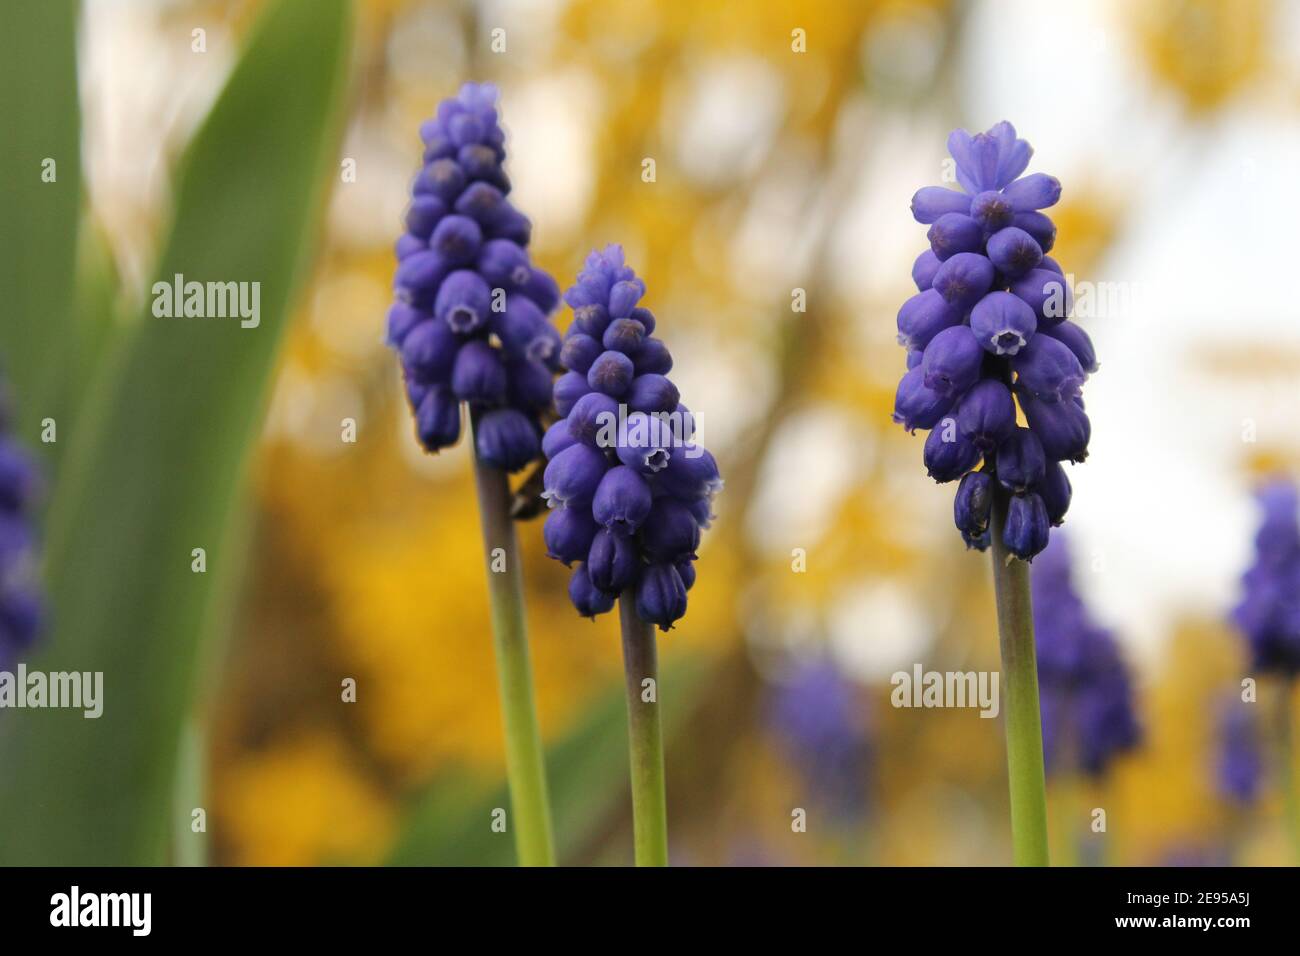 three blue grape hyacinths closeup in the flower garden with a yellow and green background of forsythia and plants in springtime Stock Photo